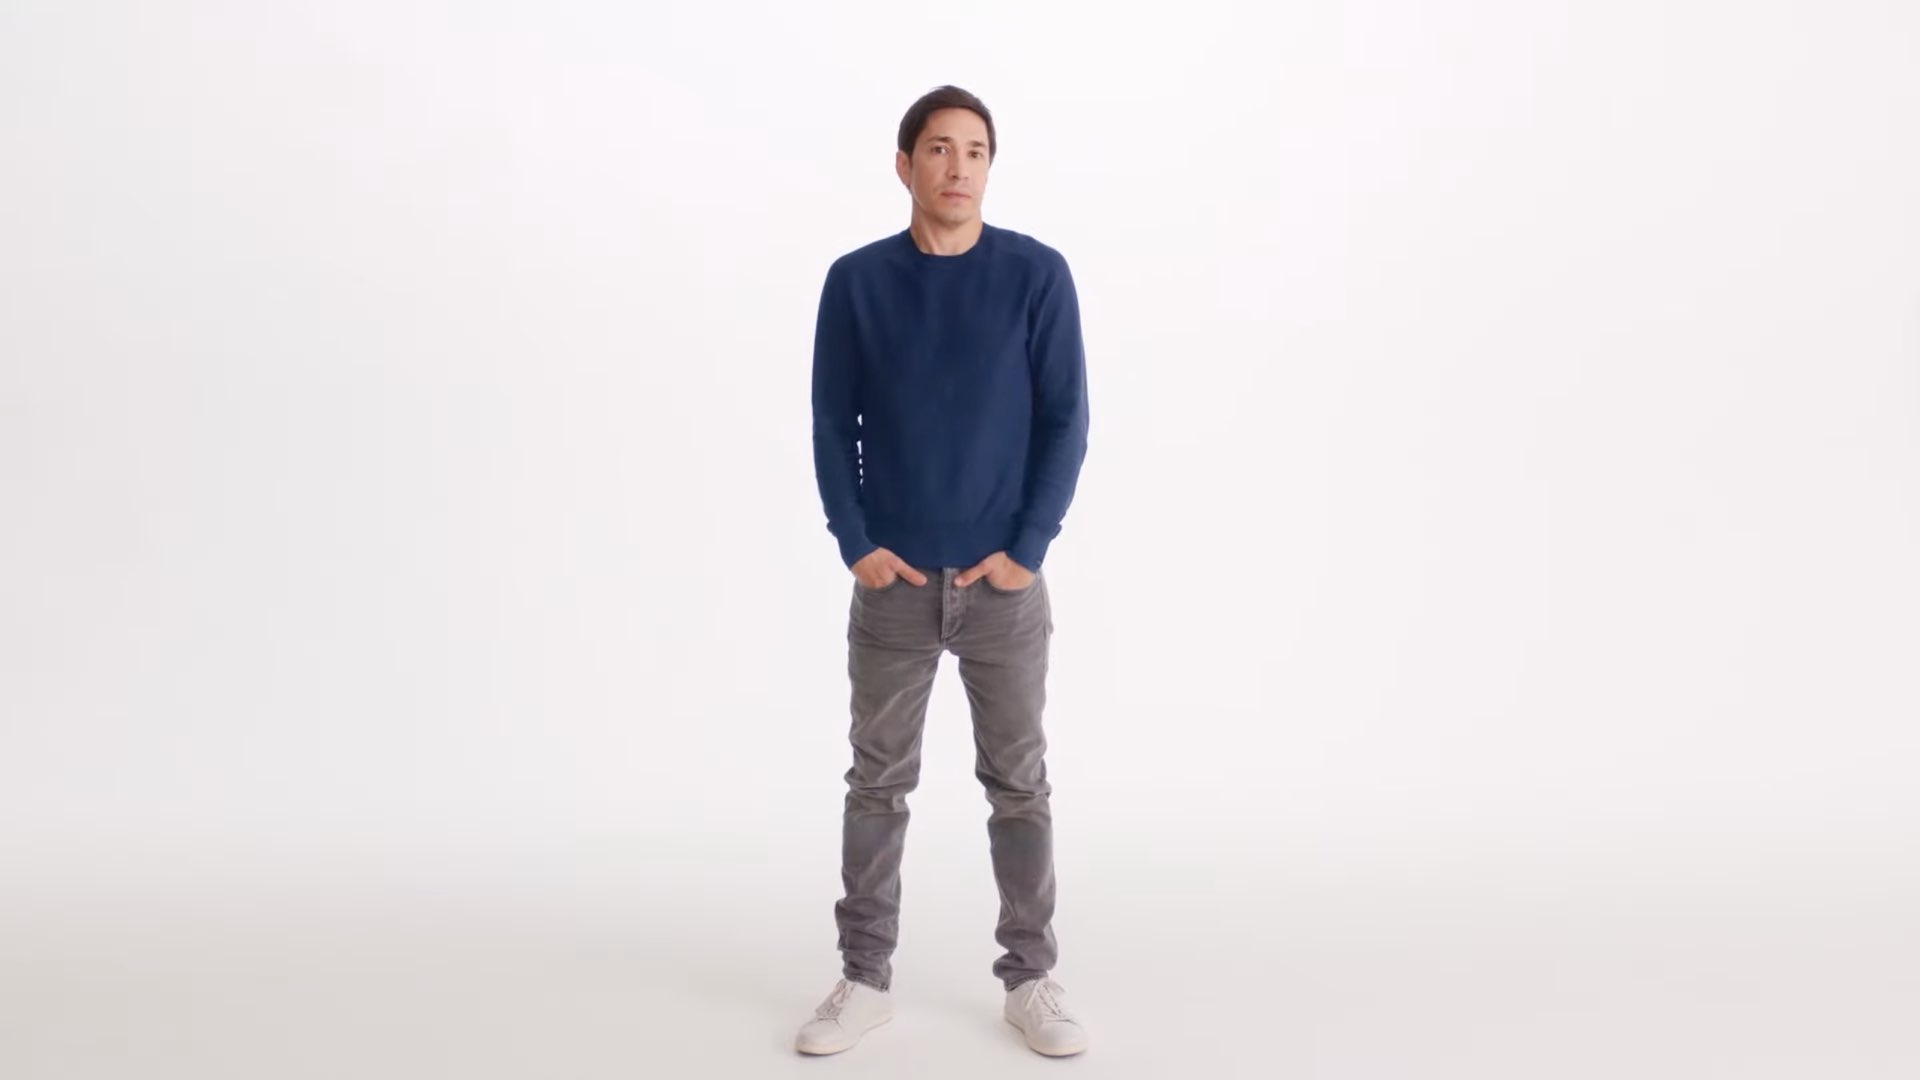 A still from Intel's anti-Apple ad campaign featuring Mac vs. PC star Justin Long